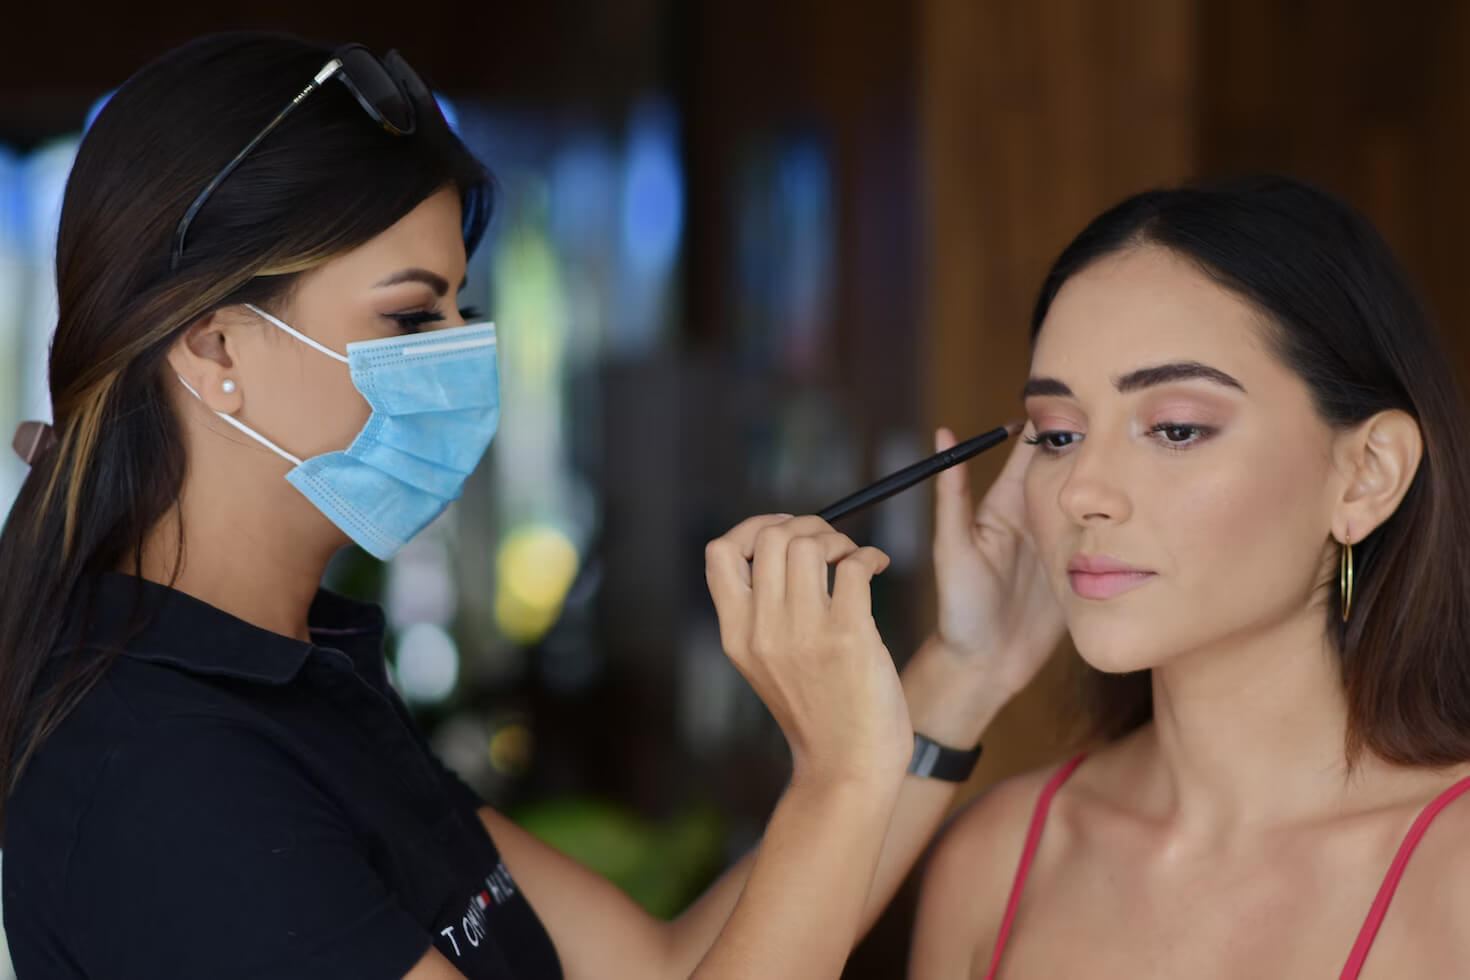 Makeup Artist Qualifications That Will Make You Successful (4) makeup artist qualifications - Makeup Artist Qualifications That Will Make You Successful 4 - Makeup Artist Qualifications That Will Make You Successful